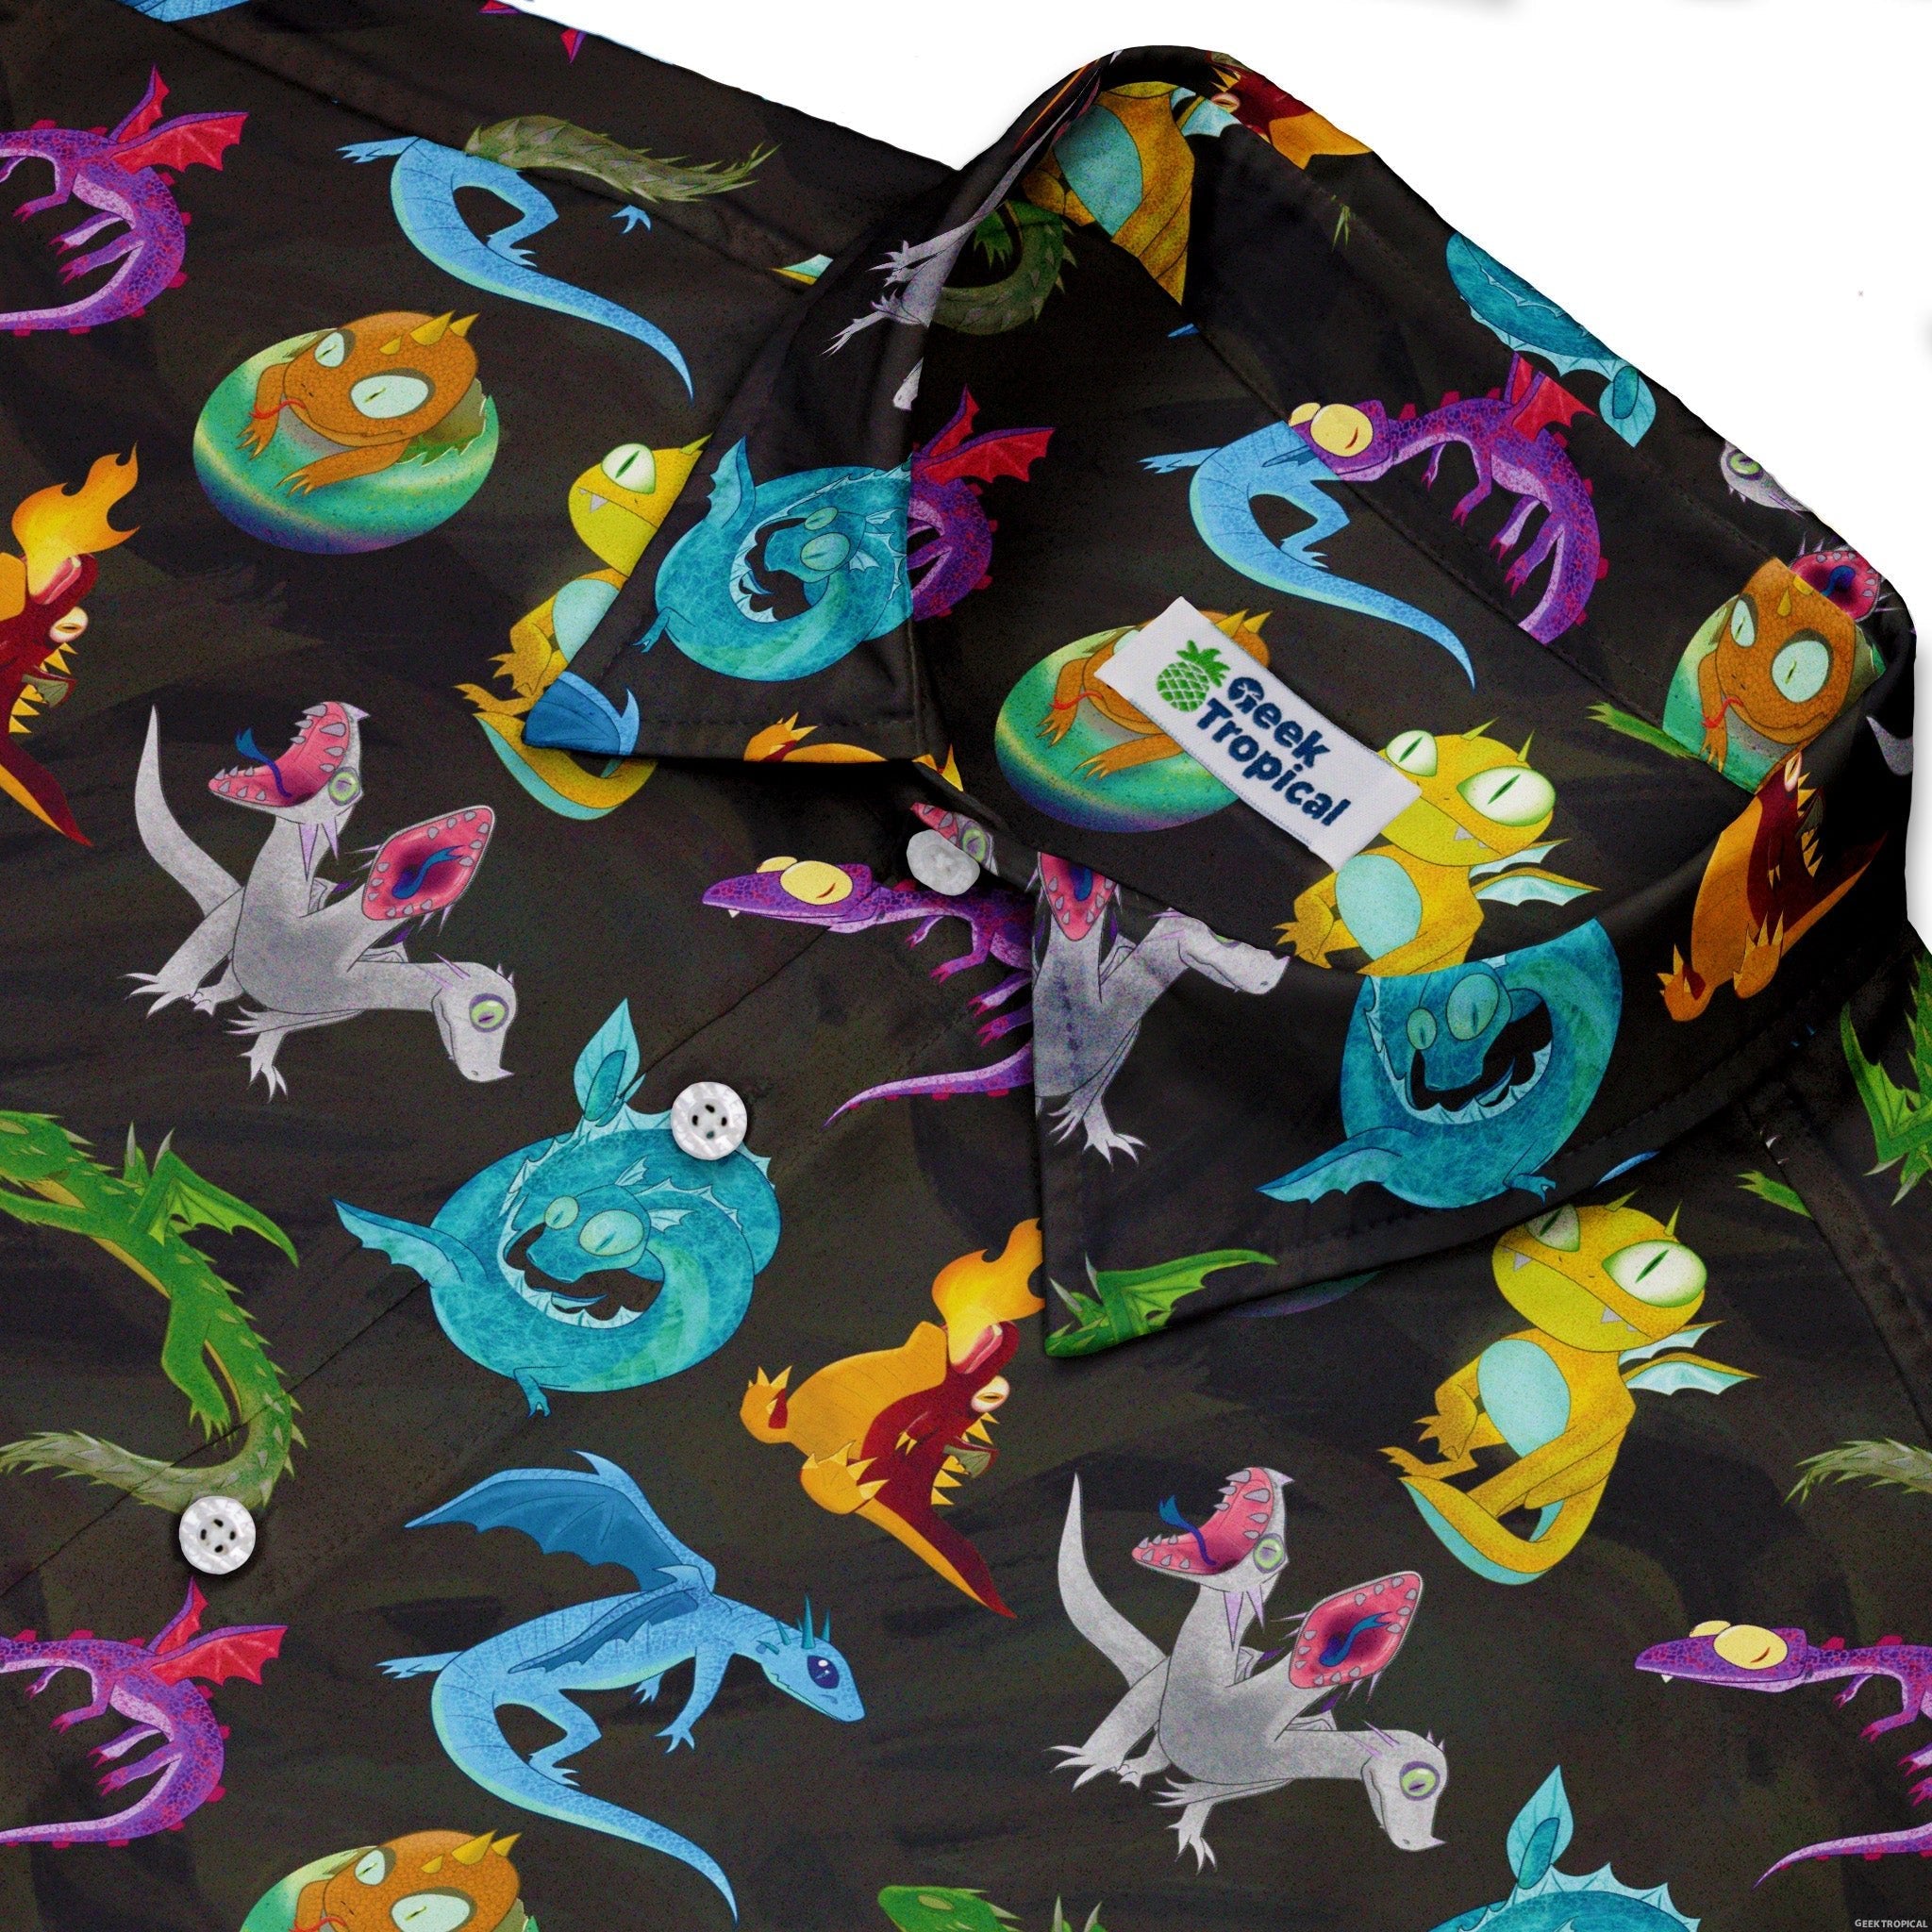 Cute Baby Dragons Button Up Shirt - adult sizing - Animal Patterns - Designs by Nathan